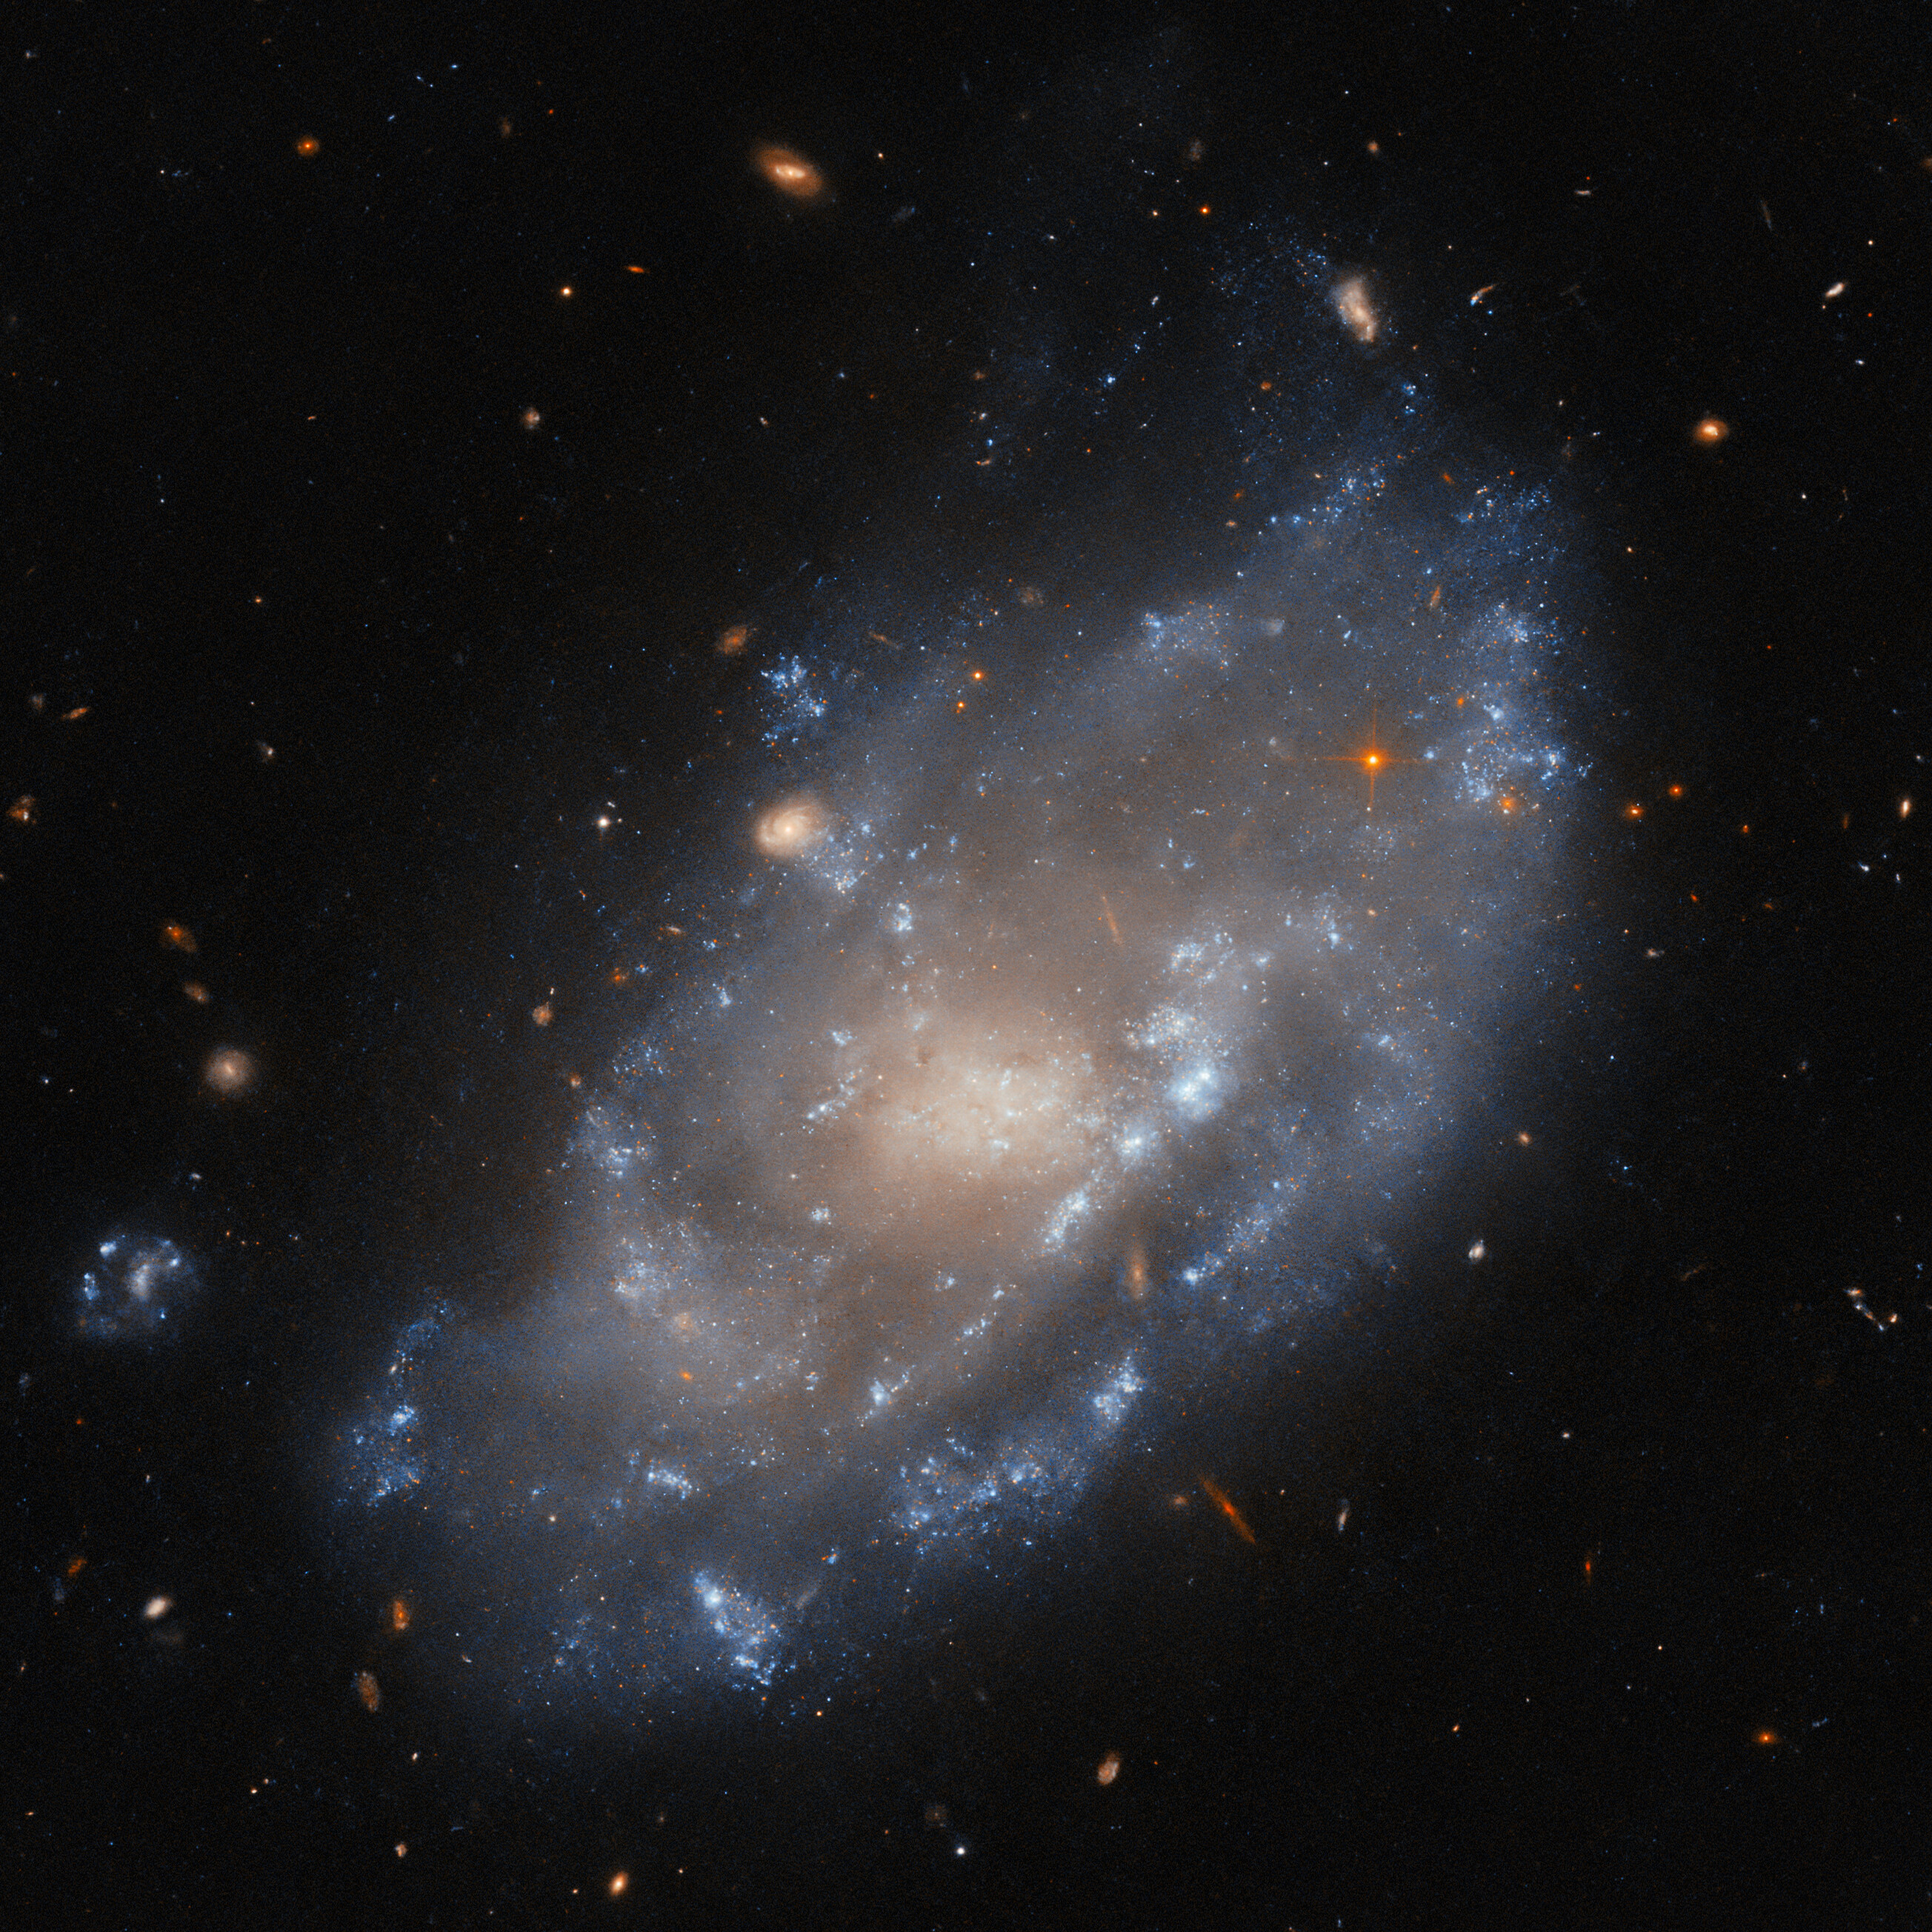 A spiral galaxy viewed tilted at a diagonal angle and toward the viewer. The core and the disk of the galaxy are different colors but are otherwise difficult to tell apart. The disc has wispy, ragged edges and many arcs of glowing, star-forming patches. A few distant galaxies are visible in the background around the spiral galaxy, as are several foreground stars.